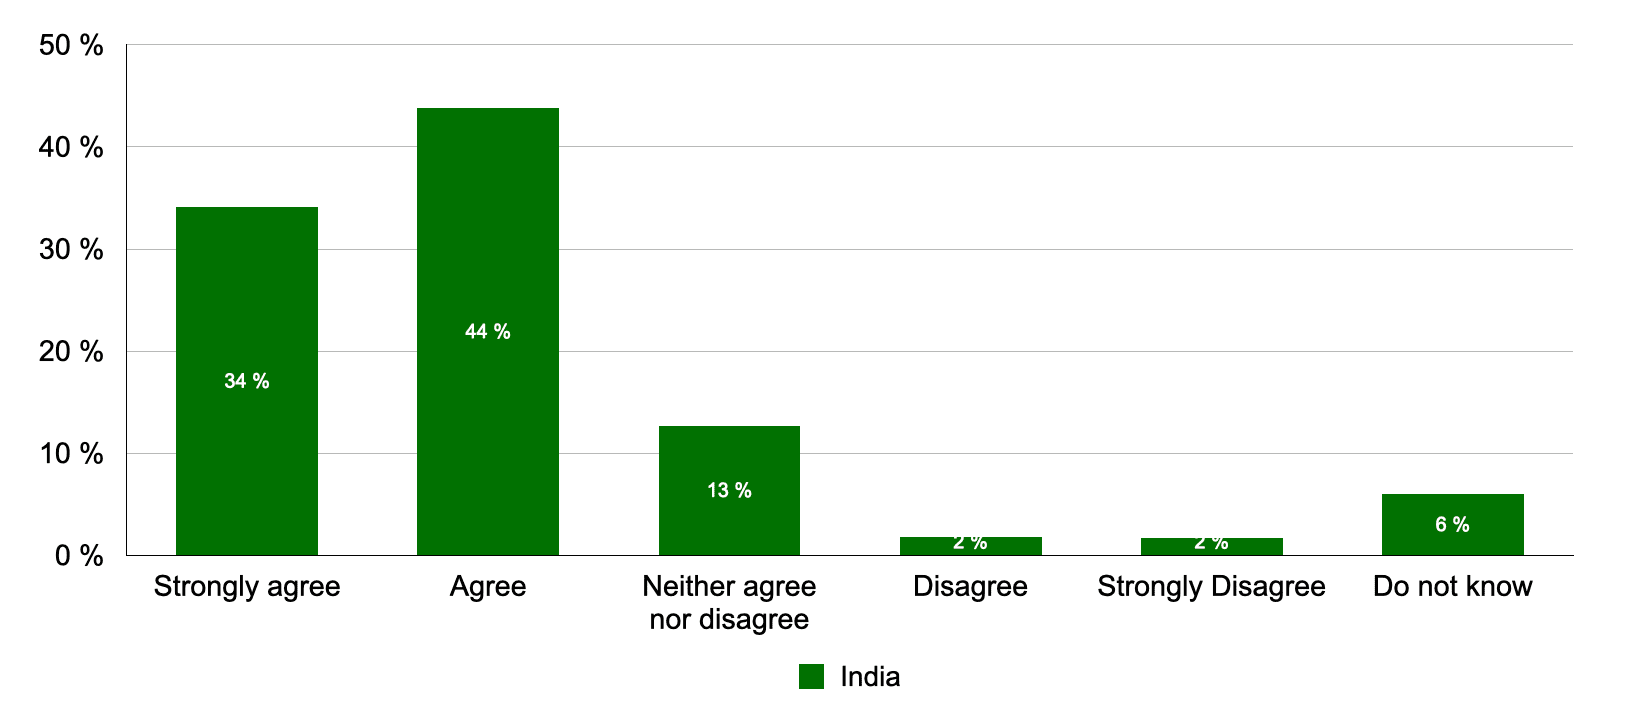 Strongly agree: 34%, Agree: 44%, Neither agree nor disagree: 13%, Disagree: 2%, Strongly disagree: 2%, Don't know: 6%